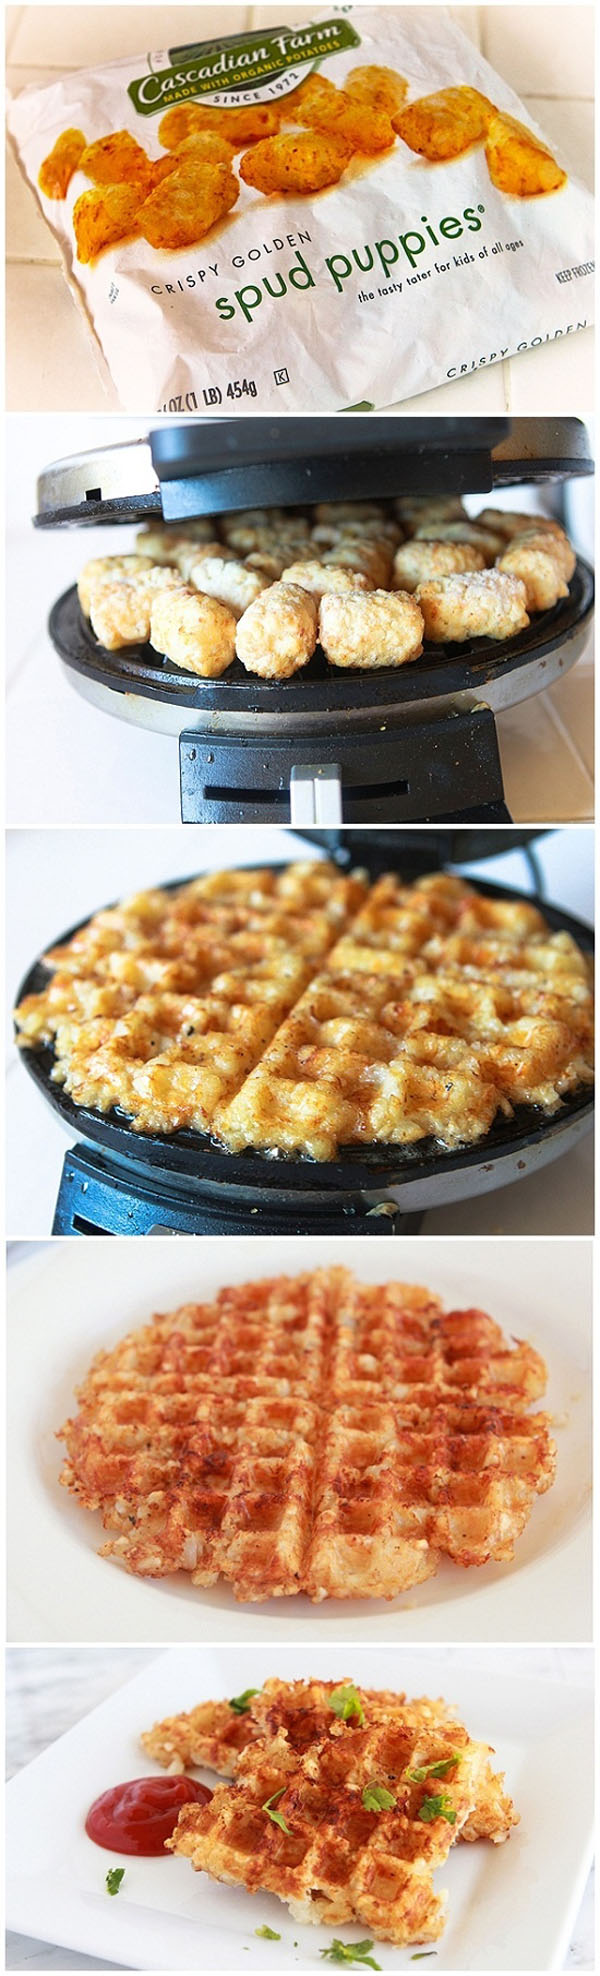 A mouthwatering collage of potato waffles.